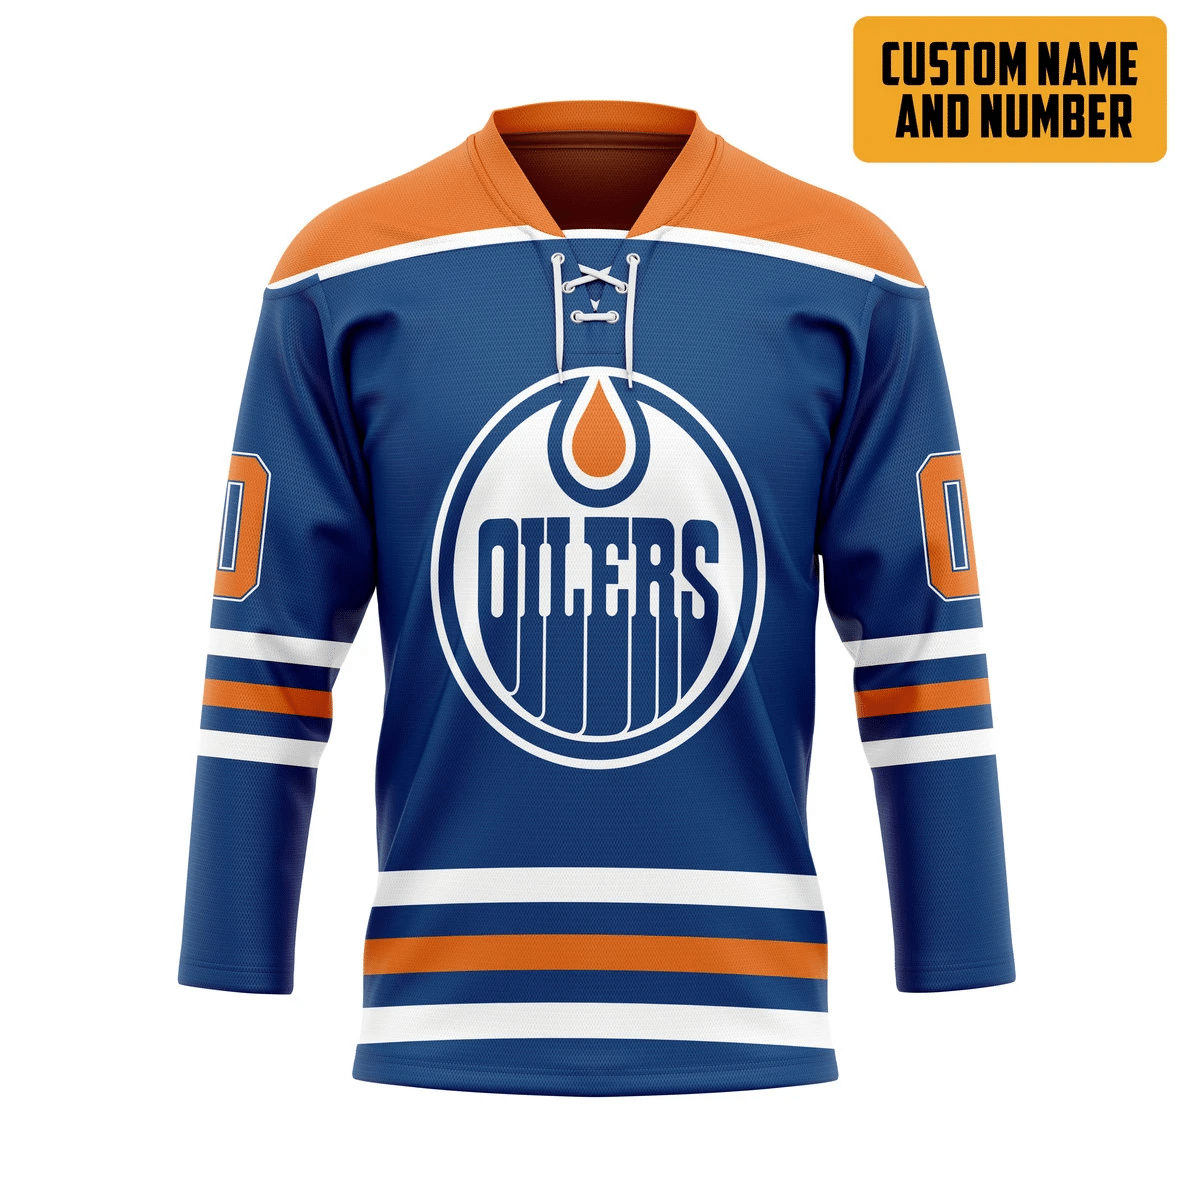 The style of a hockey jersey should match your personality. 96